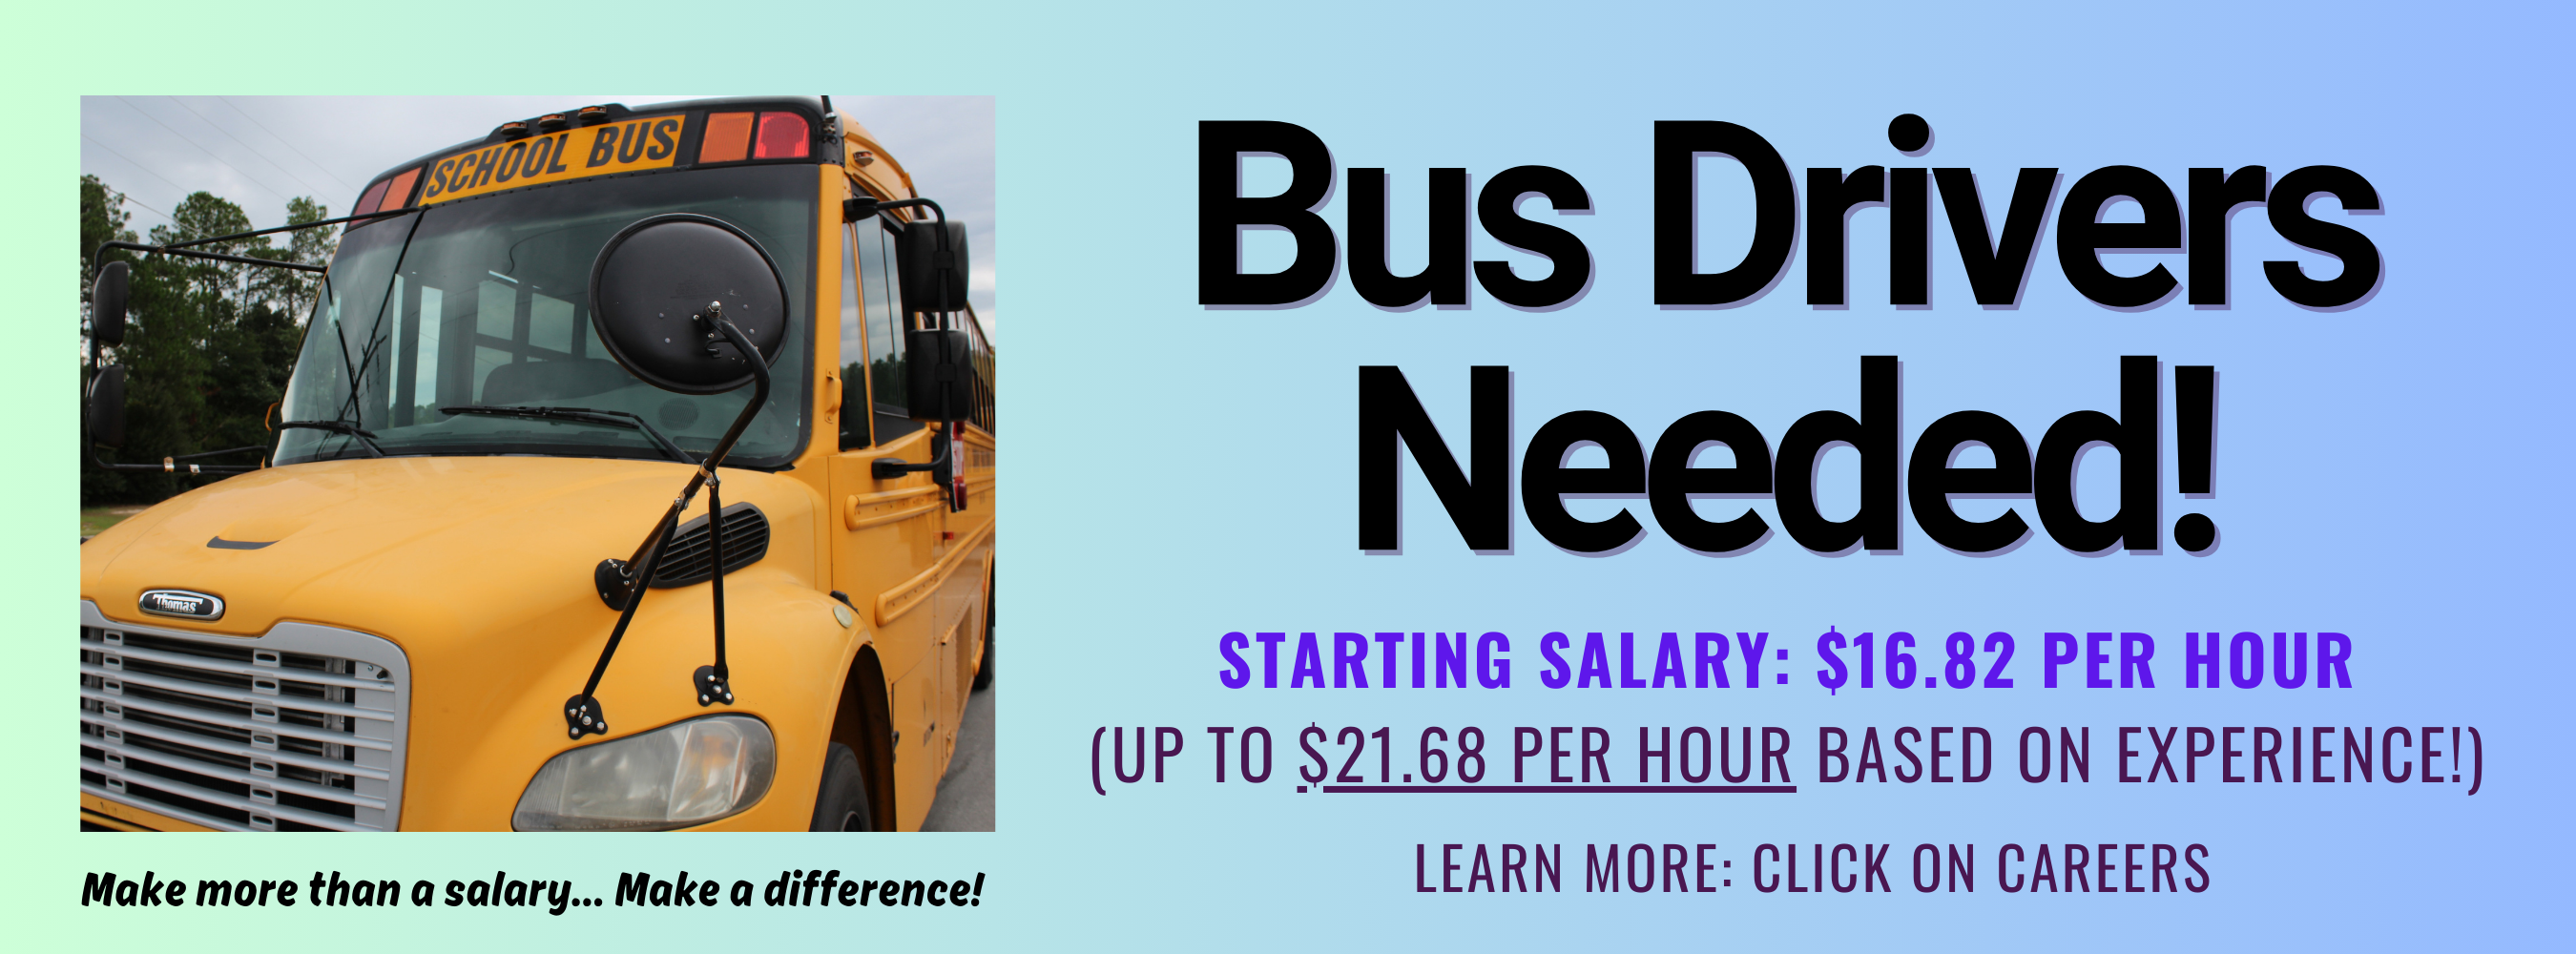 Bus Drivers Needed Starting Salary: $16.17 per hour (up to $23 Per Hour based on years of service!) Learn more: Click on Careers - Make more than a salary... Make a difference!